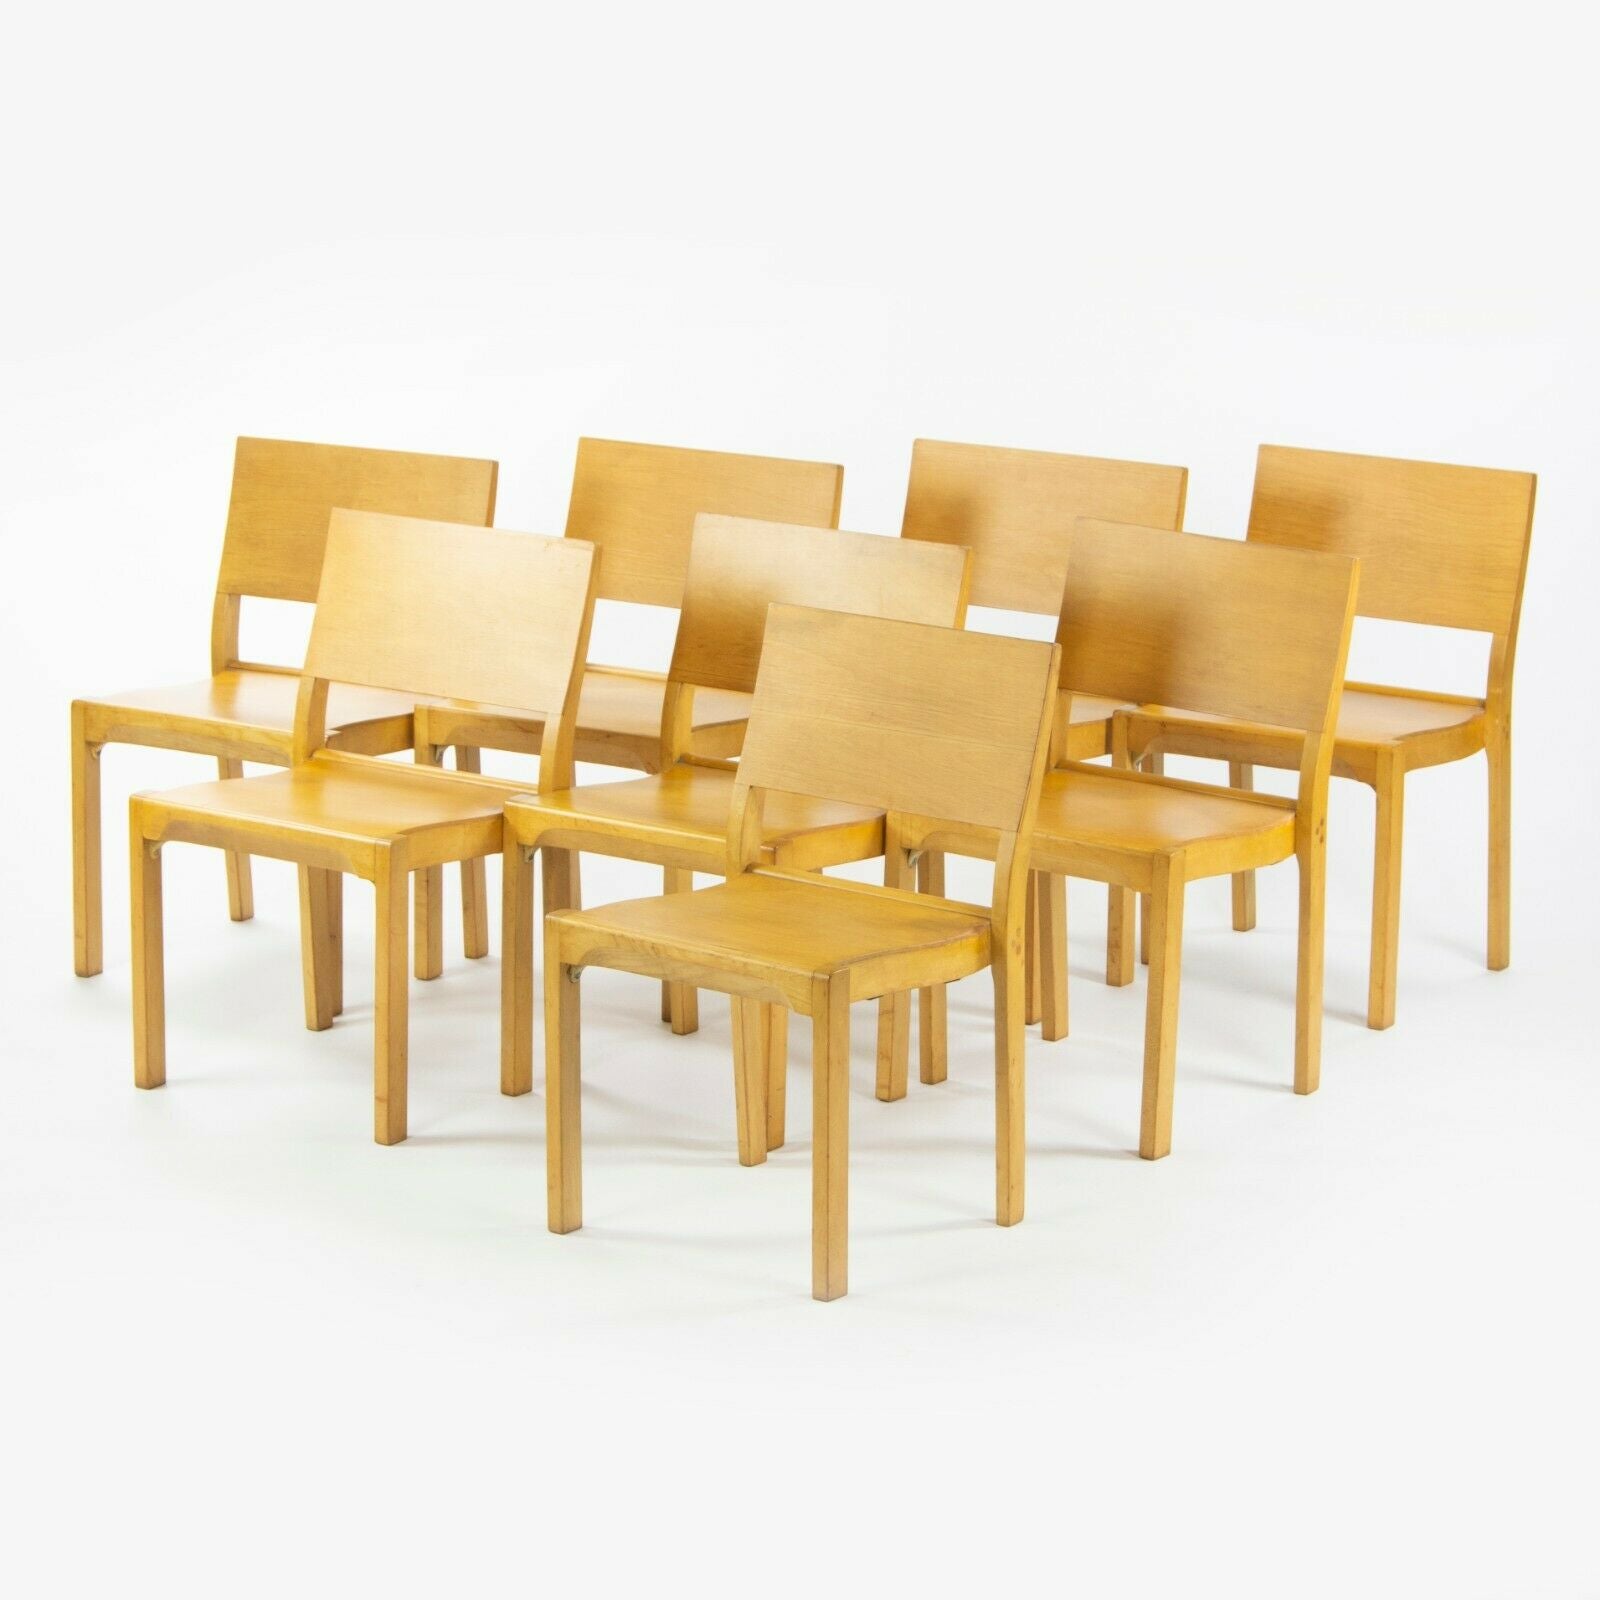 SOLD 1951 Set of 8 Alvar Aalto No. 611 Stacking Dining Chairs by Artek of Finland